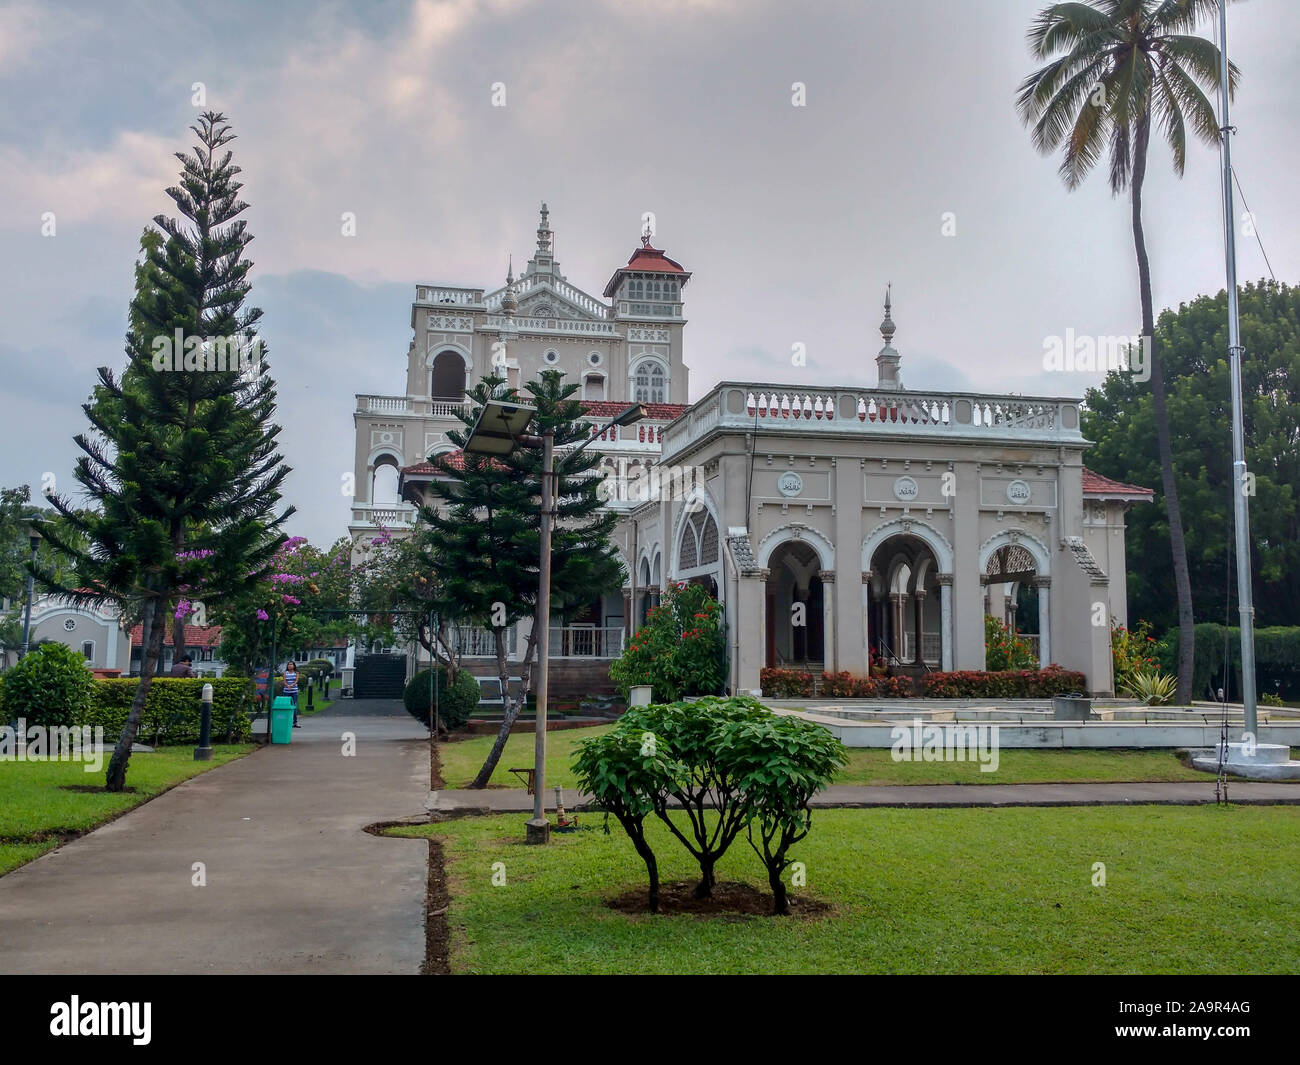 PUNE, INDIA - SEPTEMBER 16, 2016:  The Aga Khan Palace, Pune. The palace is closely linked to the Indian freedom movement as it served as a prison for Stock Photo